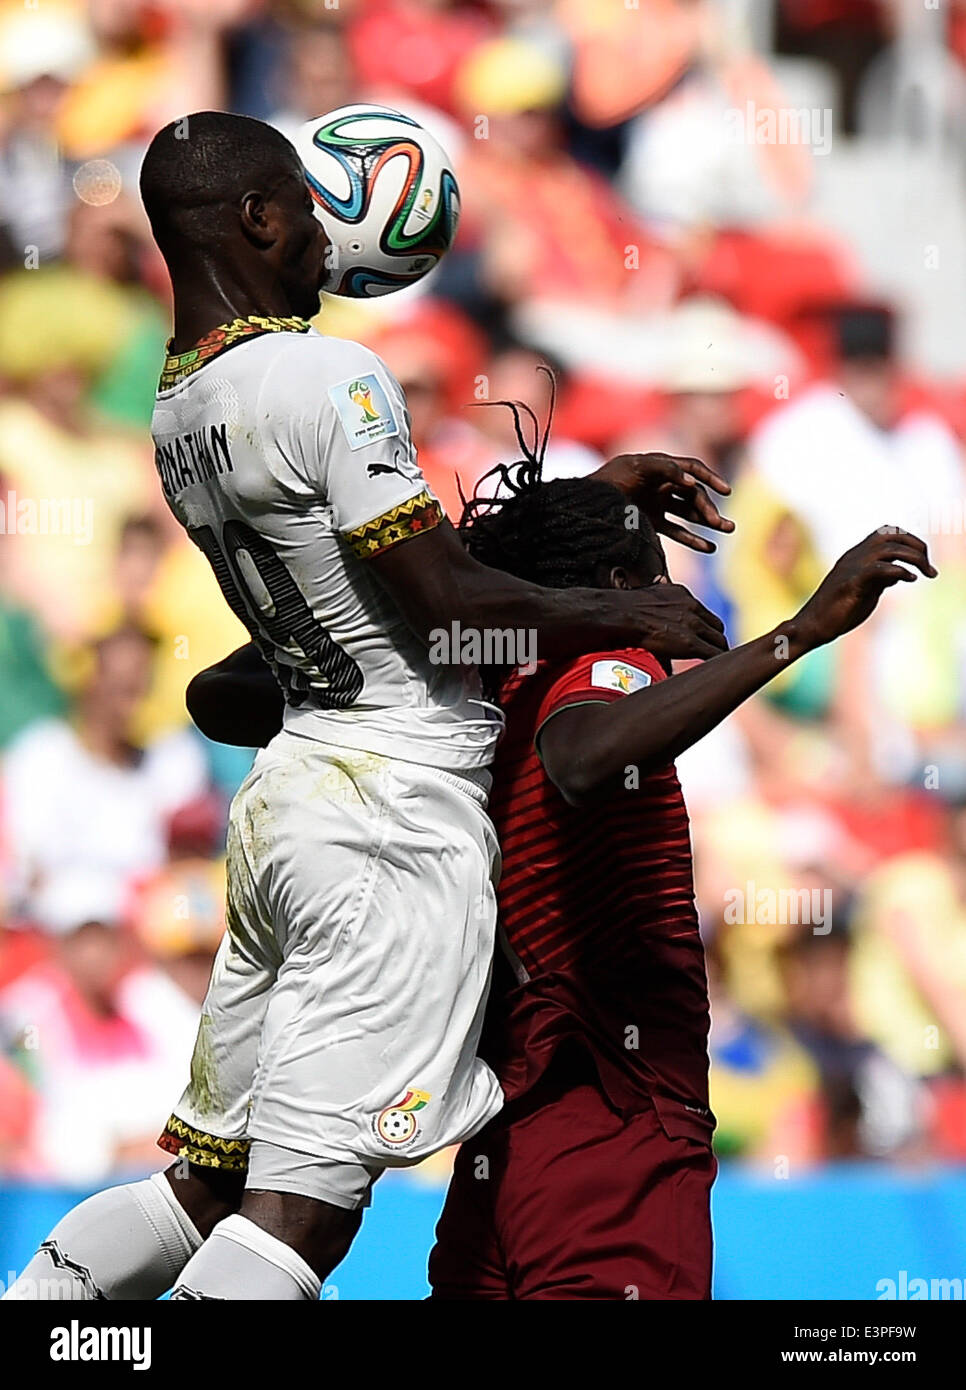 Brasilia, Brazil. 26th June, 2014. Ghana's Jonathan Mensah (L) competes for a header with Portugal's Eder during a Group G match between Portugal and Ghana of 2014 FIFA World Cup at the Estadio Nacional Stadium in Brasilia, Brazil, June 26, 2014. Portugal won 2-1 over Ghana on Thursday. © Qi Heng/Xinhua/Alamy Live News Stock Photo